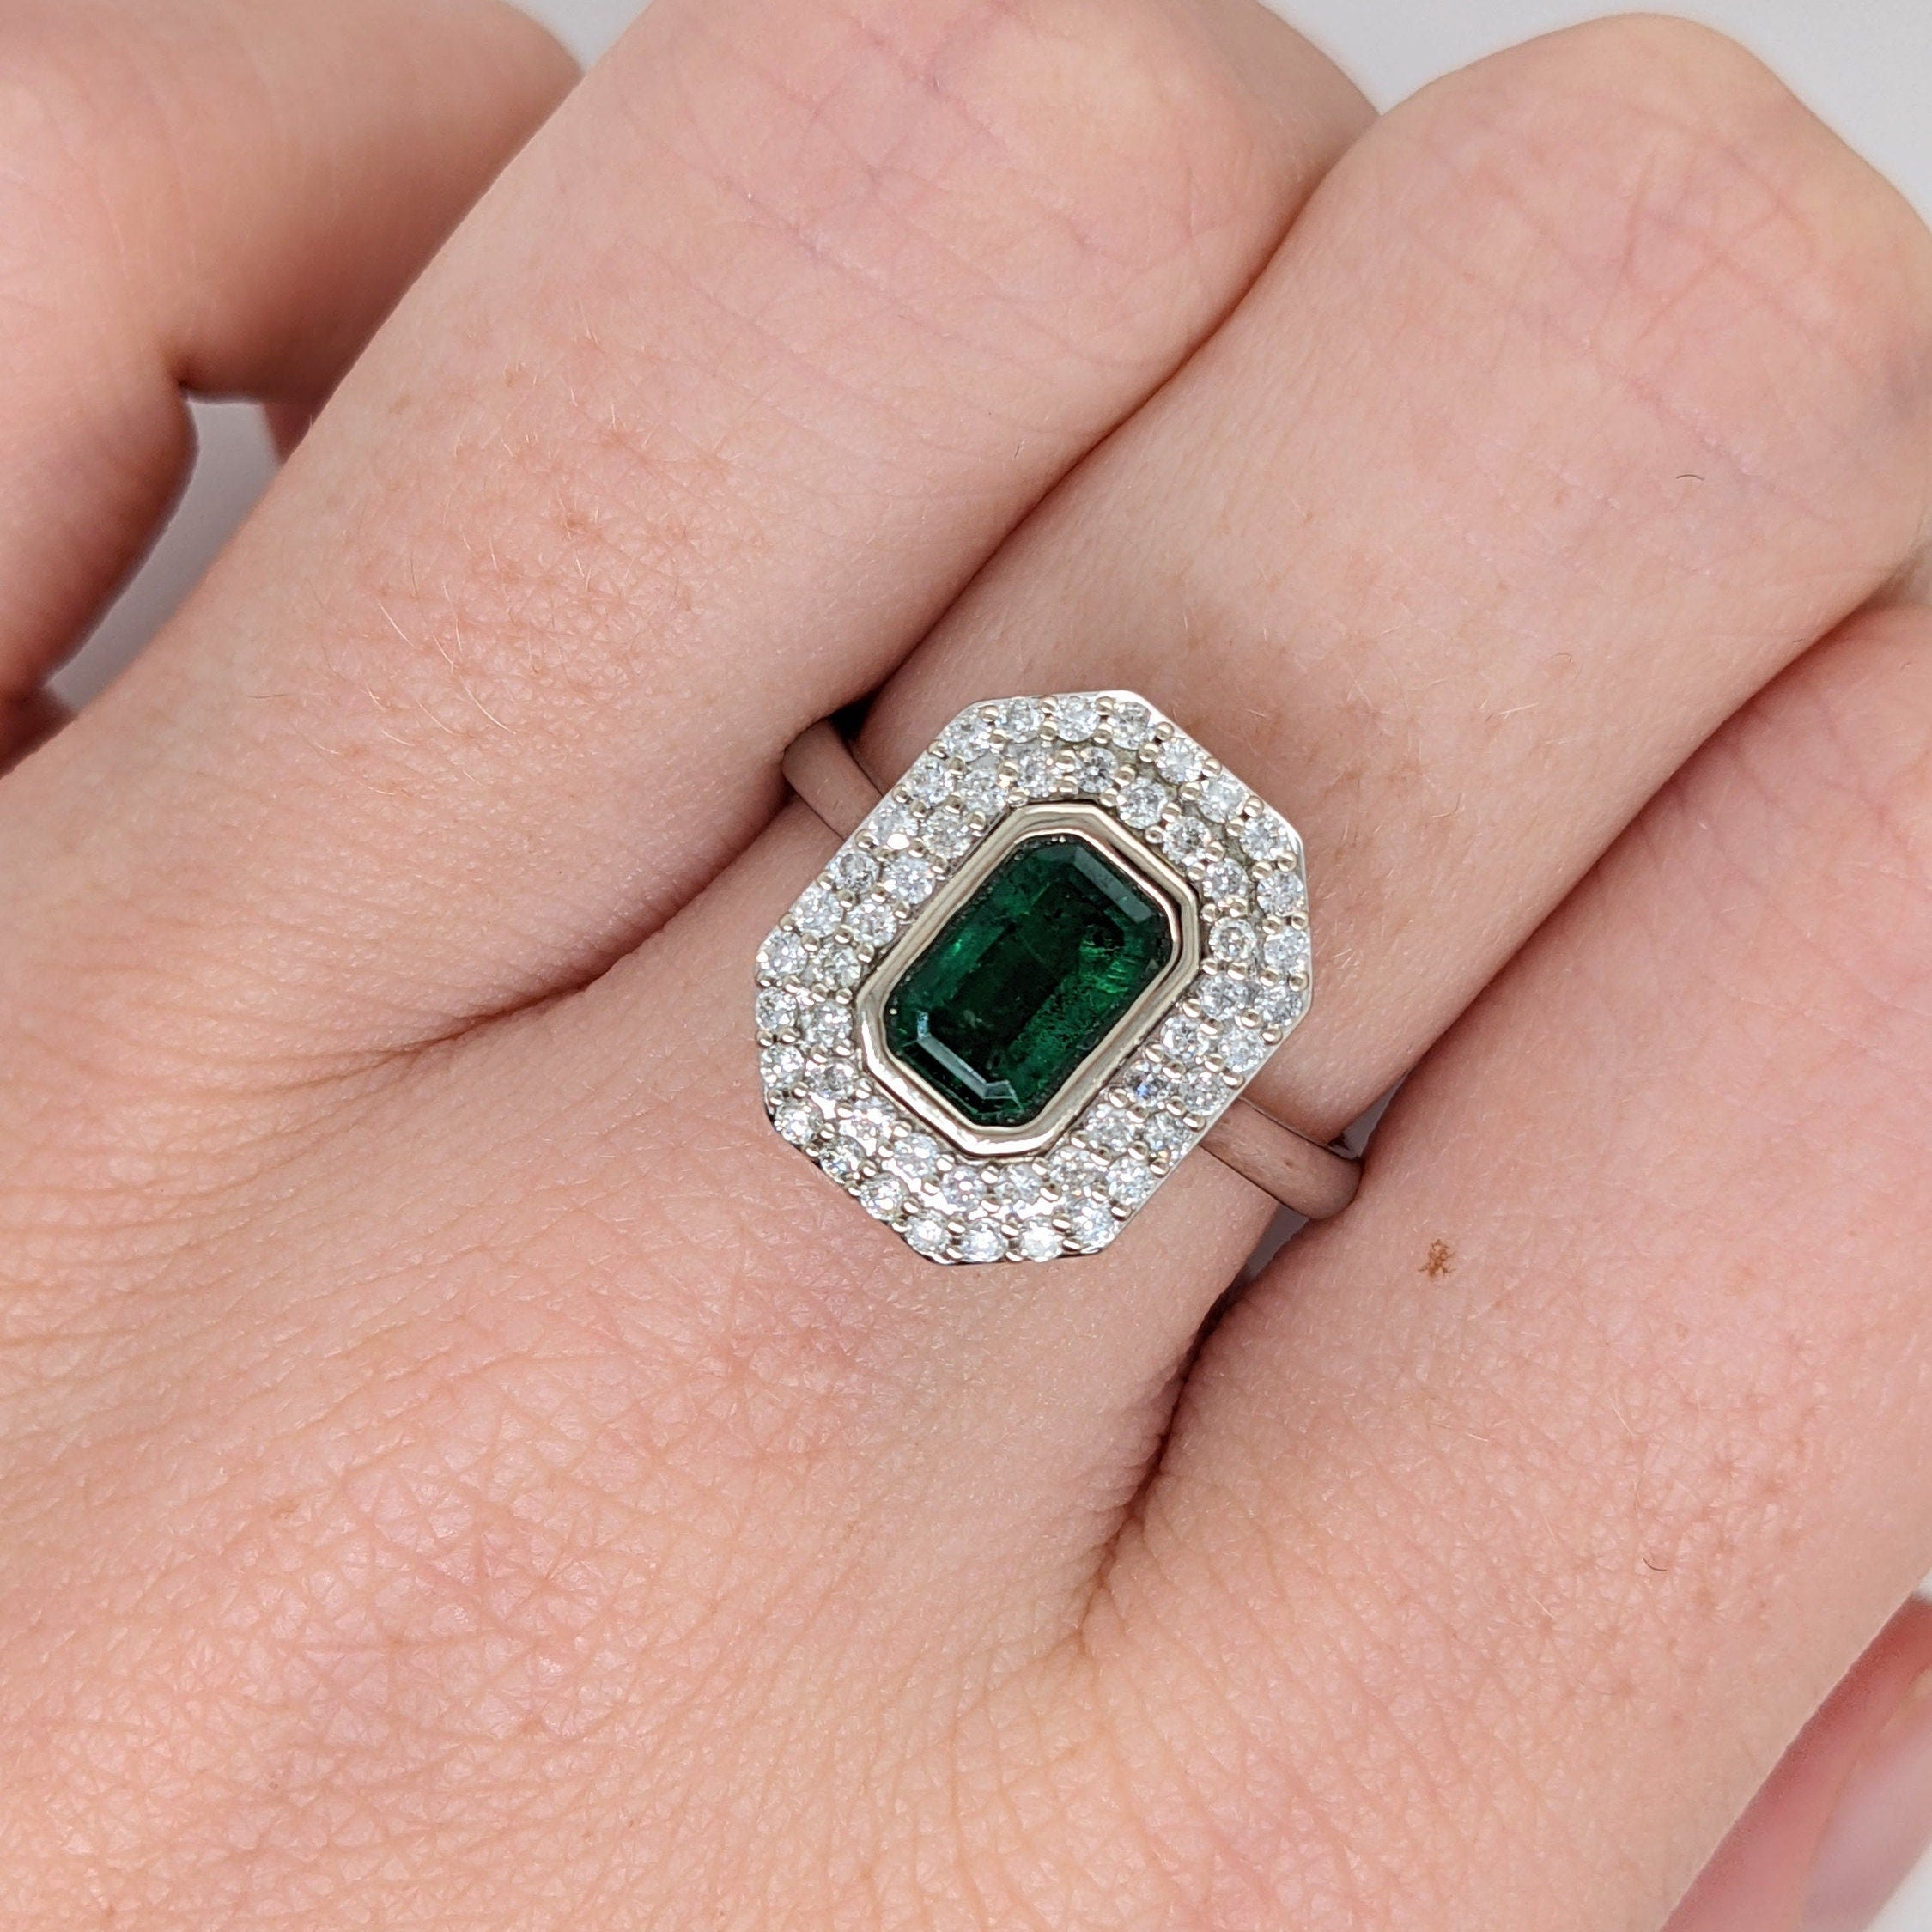 Unique Zambian Emerald Ring with Natural Diamond Accents in Solid 14k White Gold | Emerald Cut | Green Gemstone Jewelry | May Birthstone